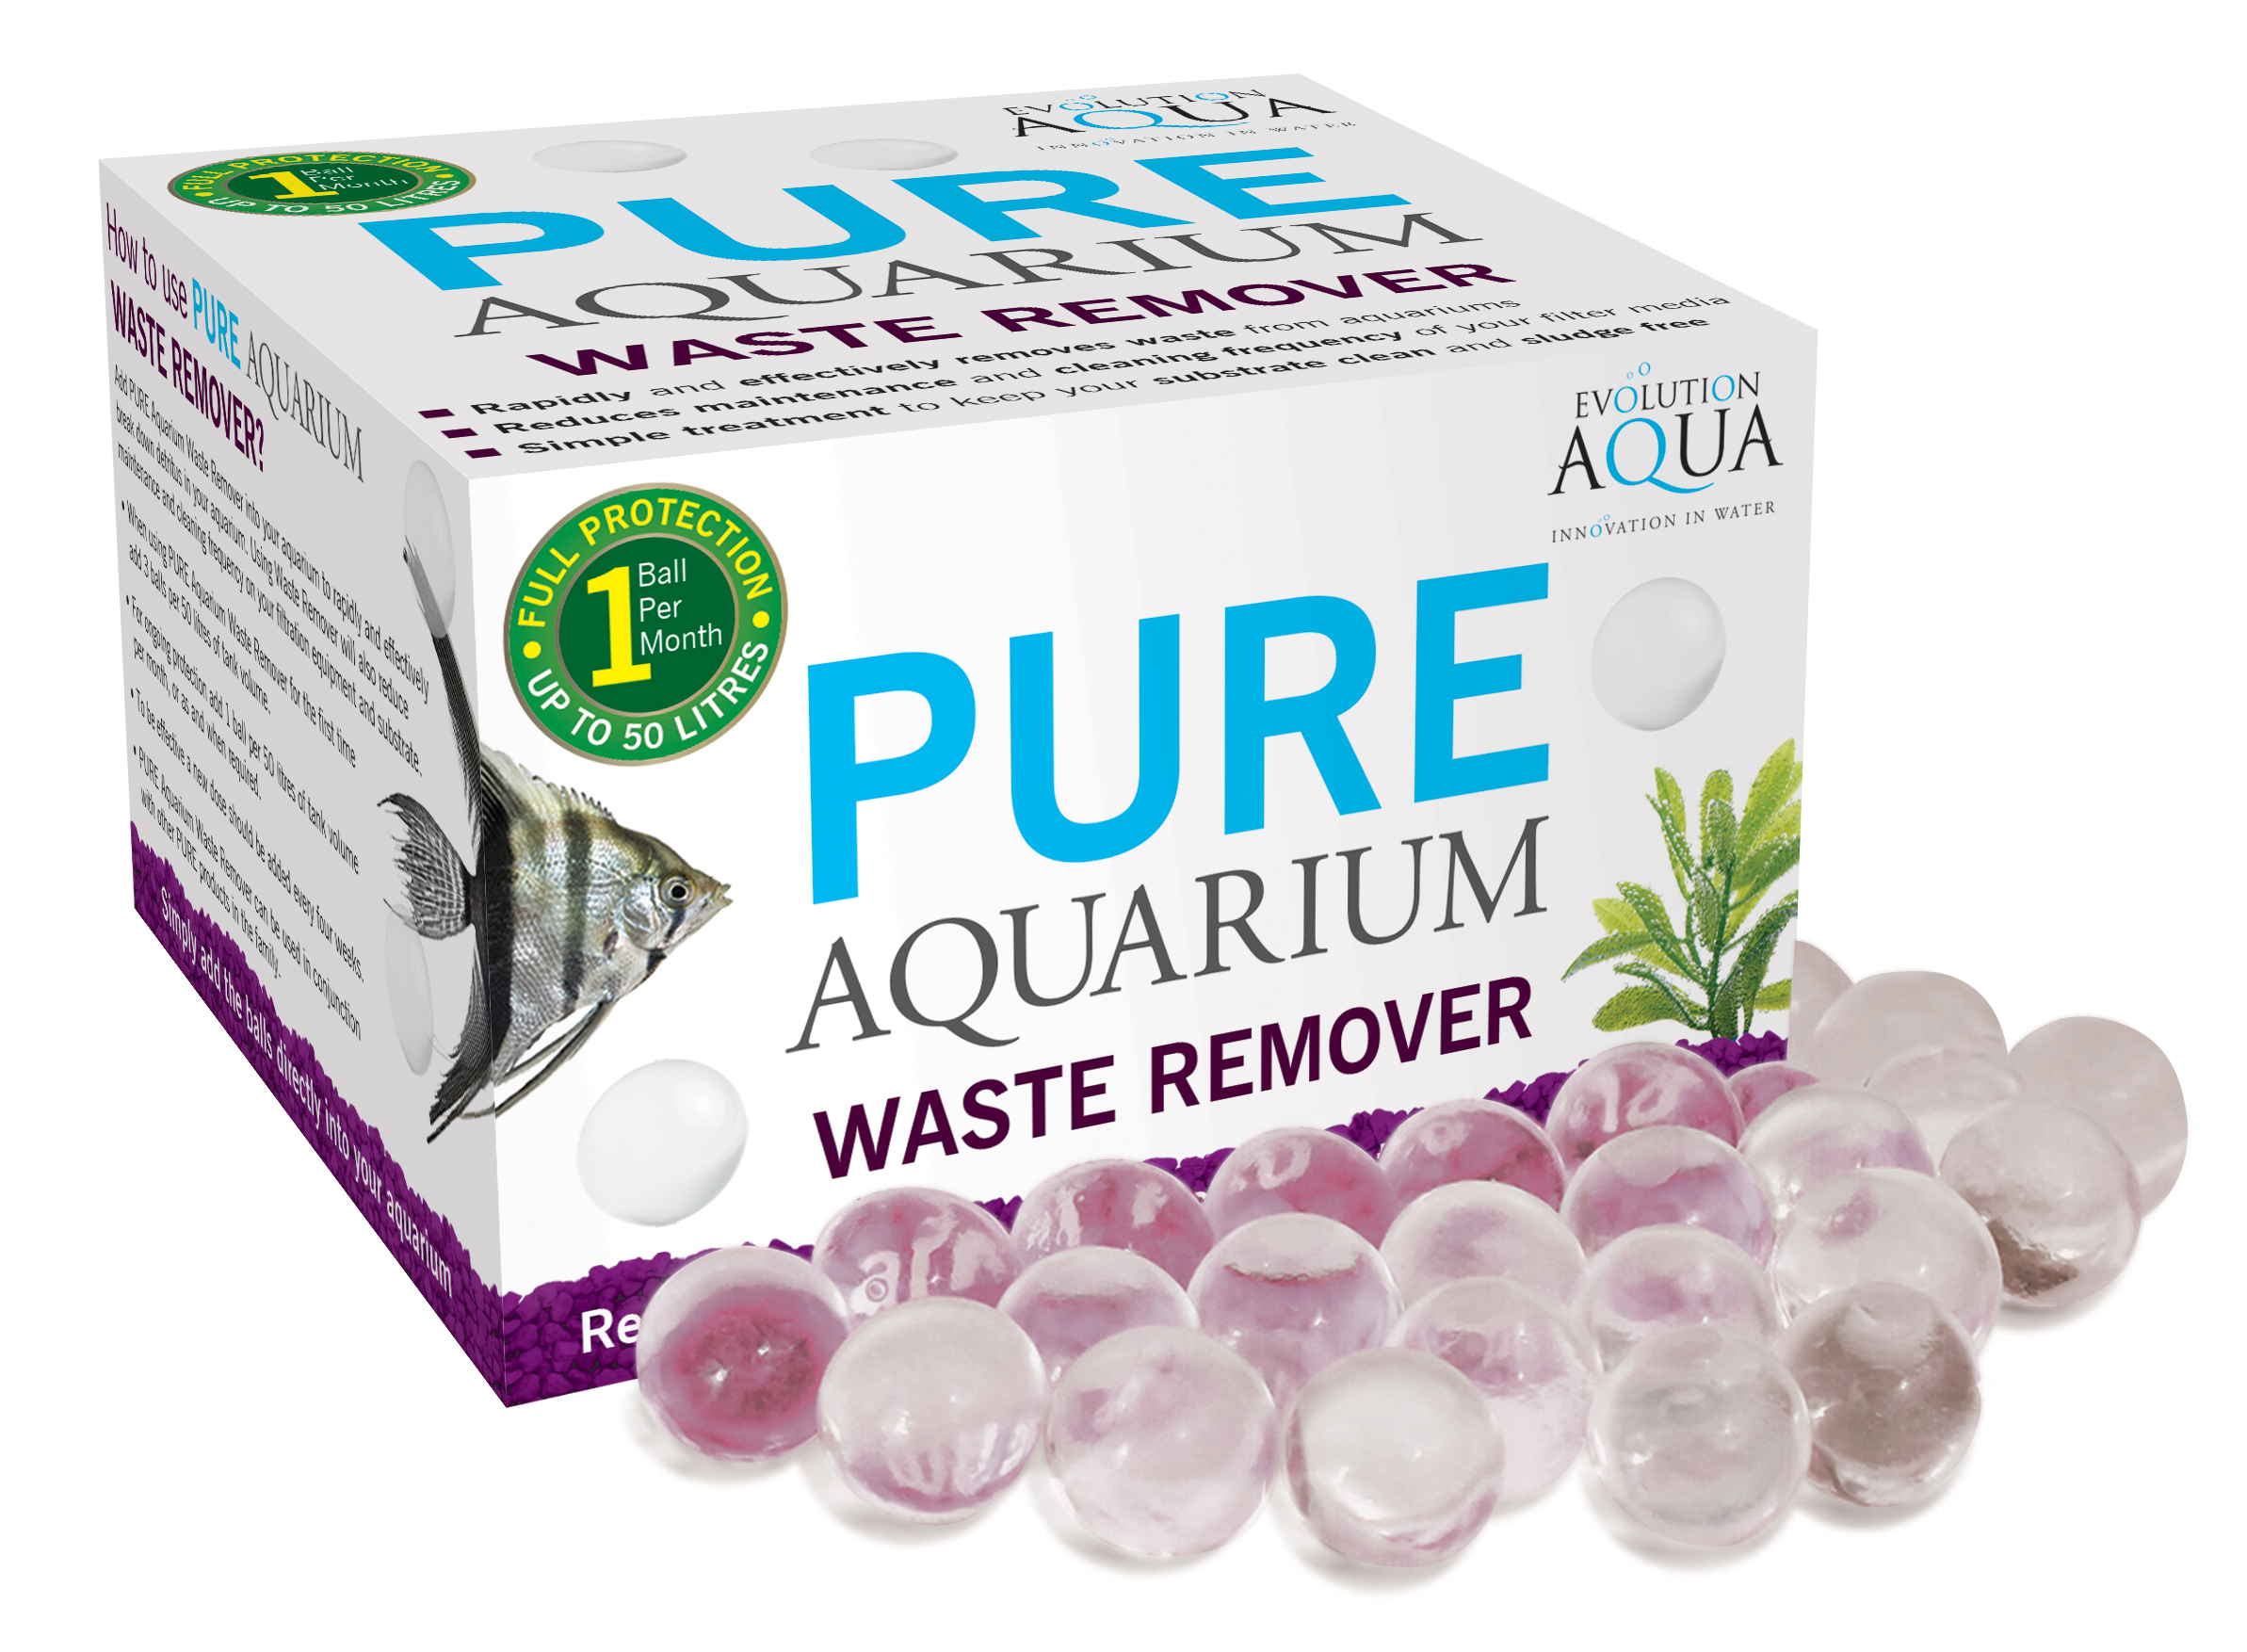 New PURE Aquarium Waste Remover Available Now